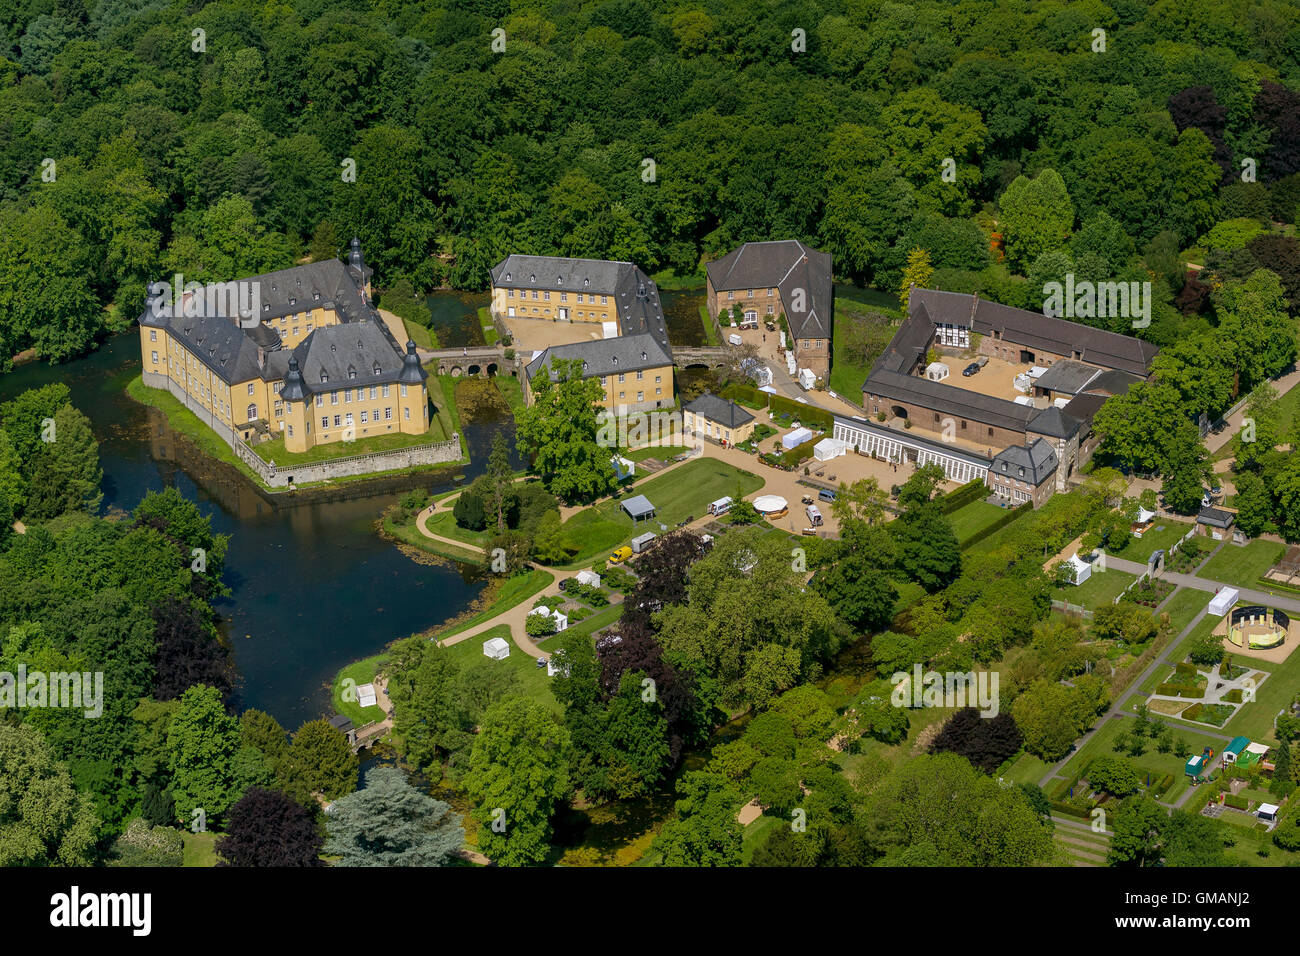 Aerial view, water castle of the city Juchen, Jüchen, Rhineland, two forecourts, parking facilities, an English landscape garden Stock Photo